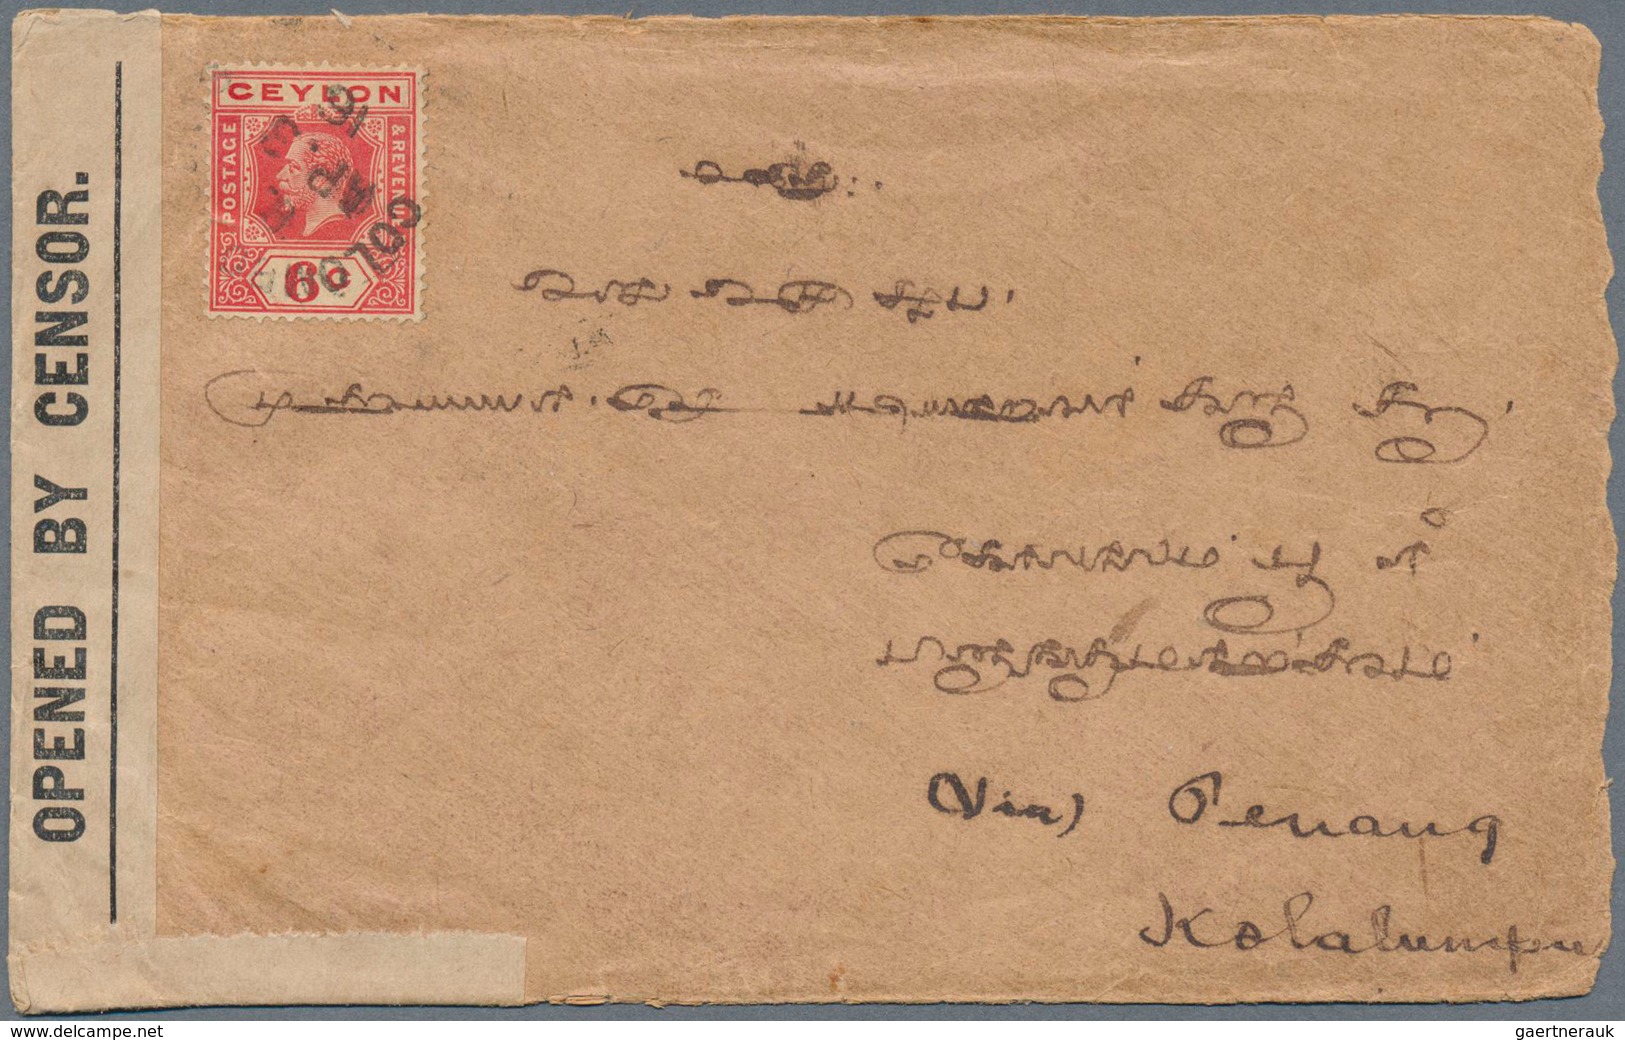 05369 Malaiische Staaten - Straits Settlements: 1916, Ceylon: 6 C Scarlet Single Franking On Cover From CO - Straits Settlements